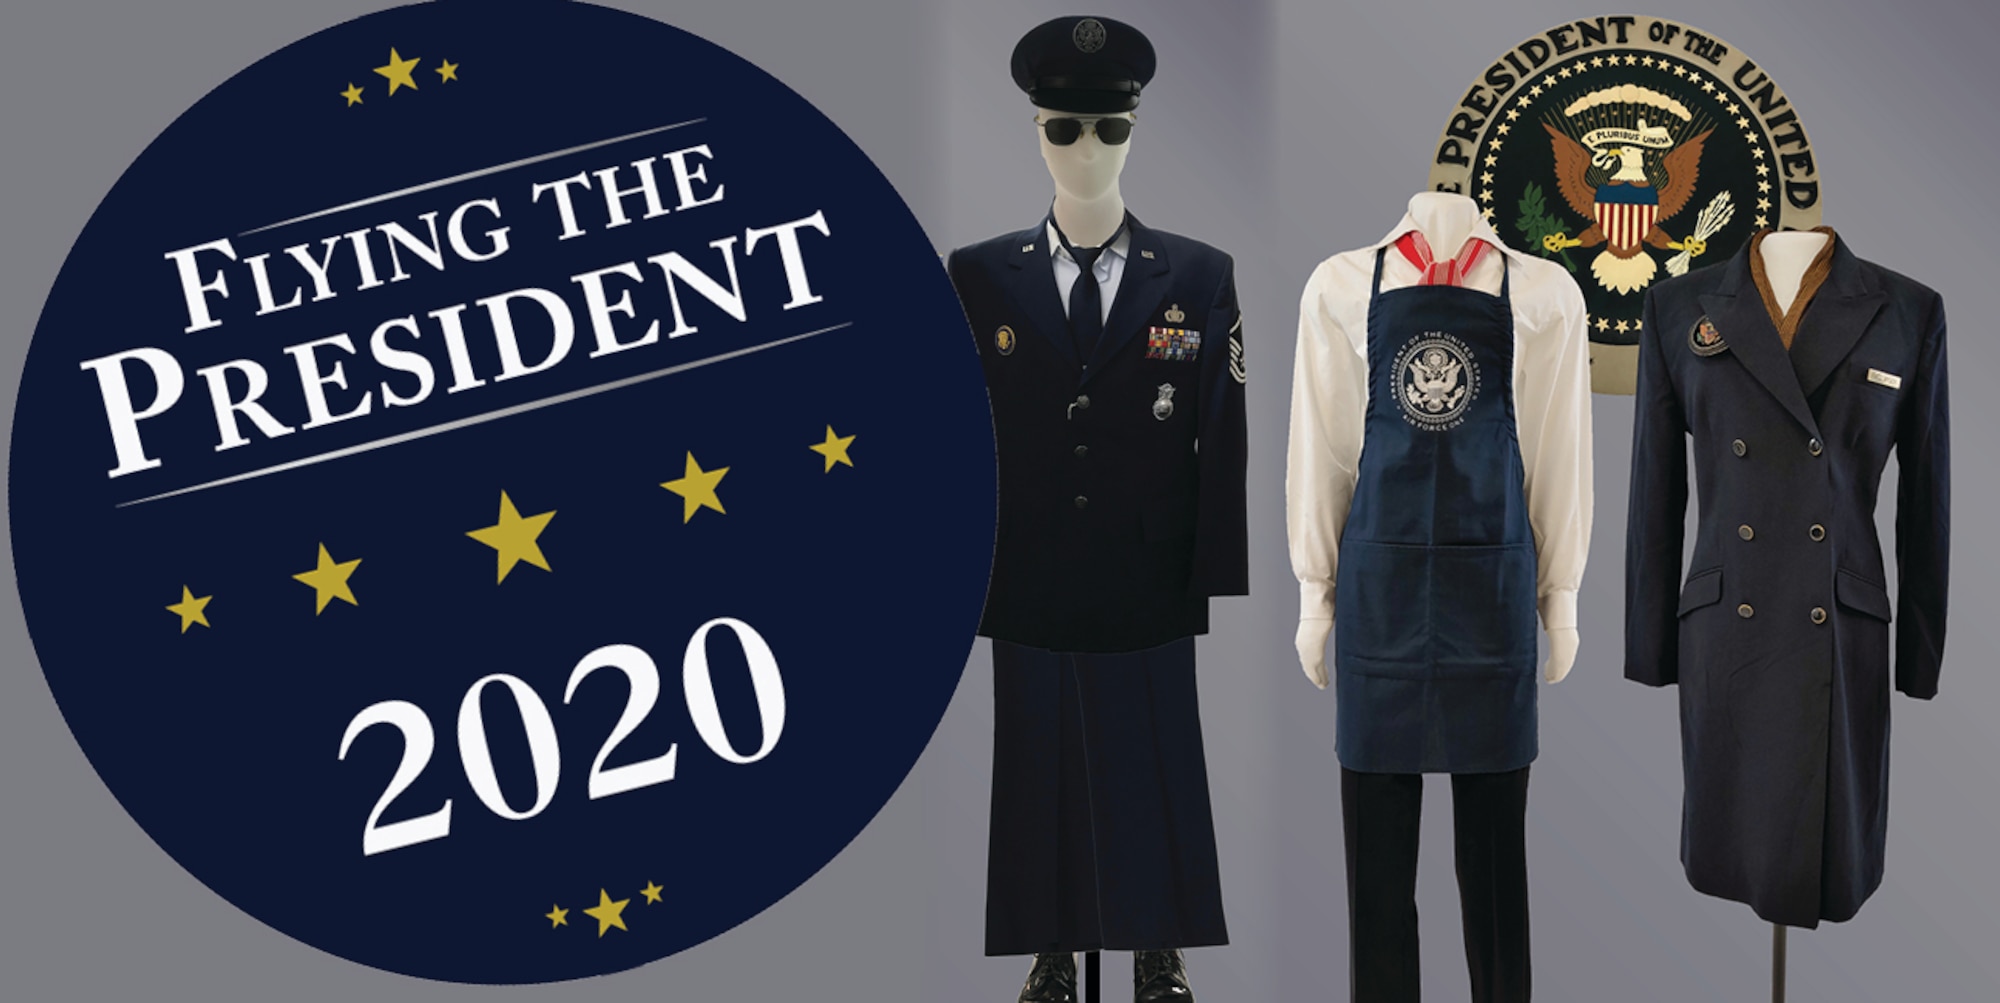 Graphic showing three mannequins wearing uniforms of Air Force One crew and a blue circle with text that reads “Flying the President."